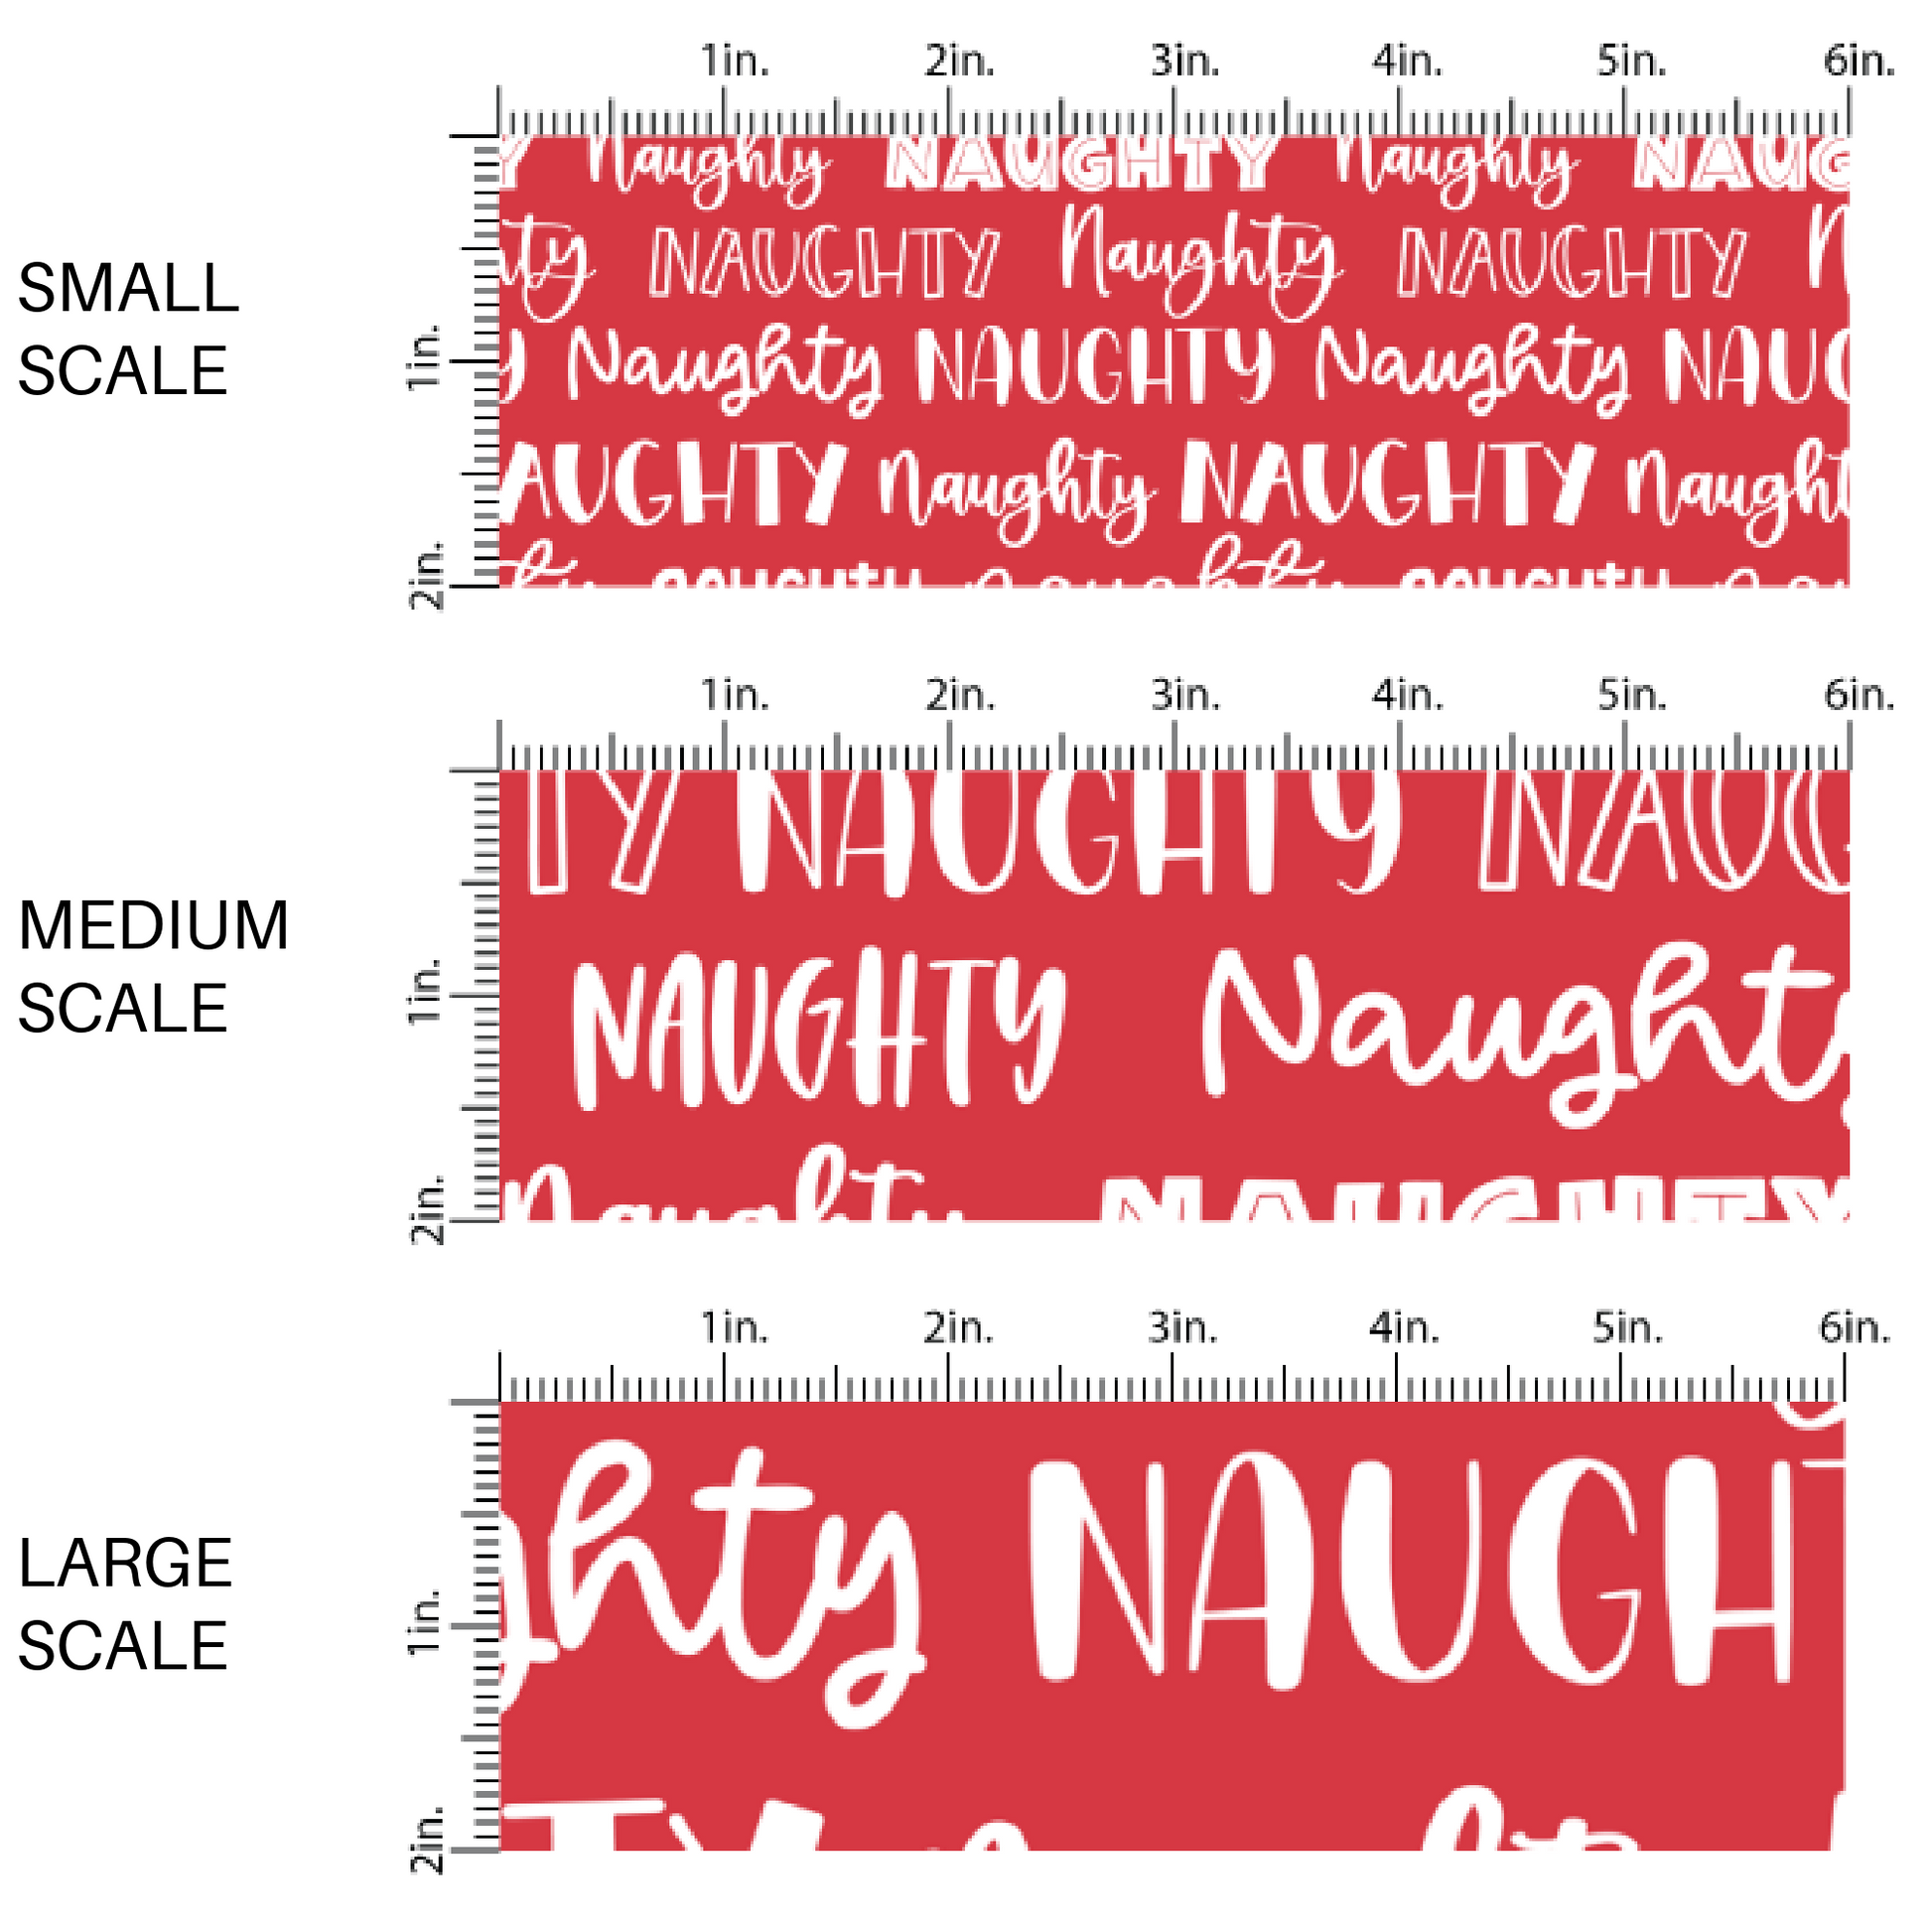 This scale chart of small scale, medium scale, and large scale of these holiday pattern themed fabric by the yard features "naughty" lettering on red. This fun Christmas fabric can be used for all your sewing and crafting needs!